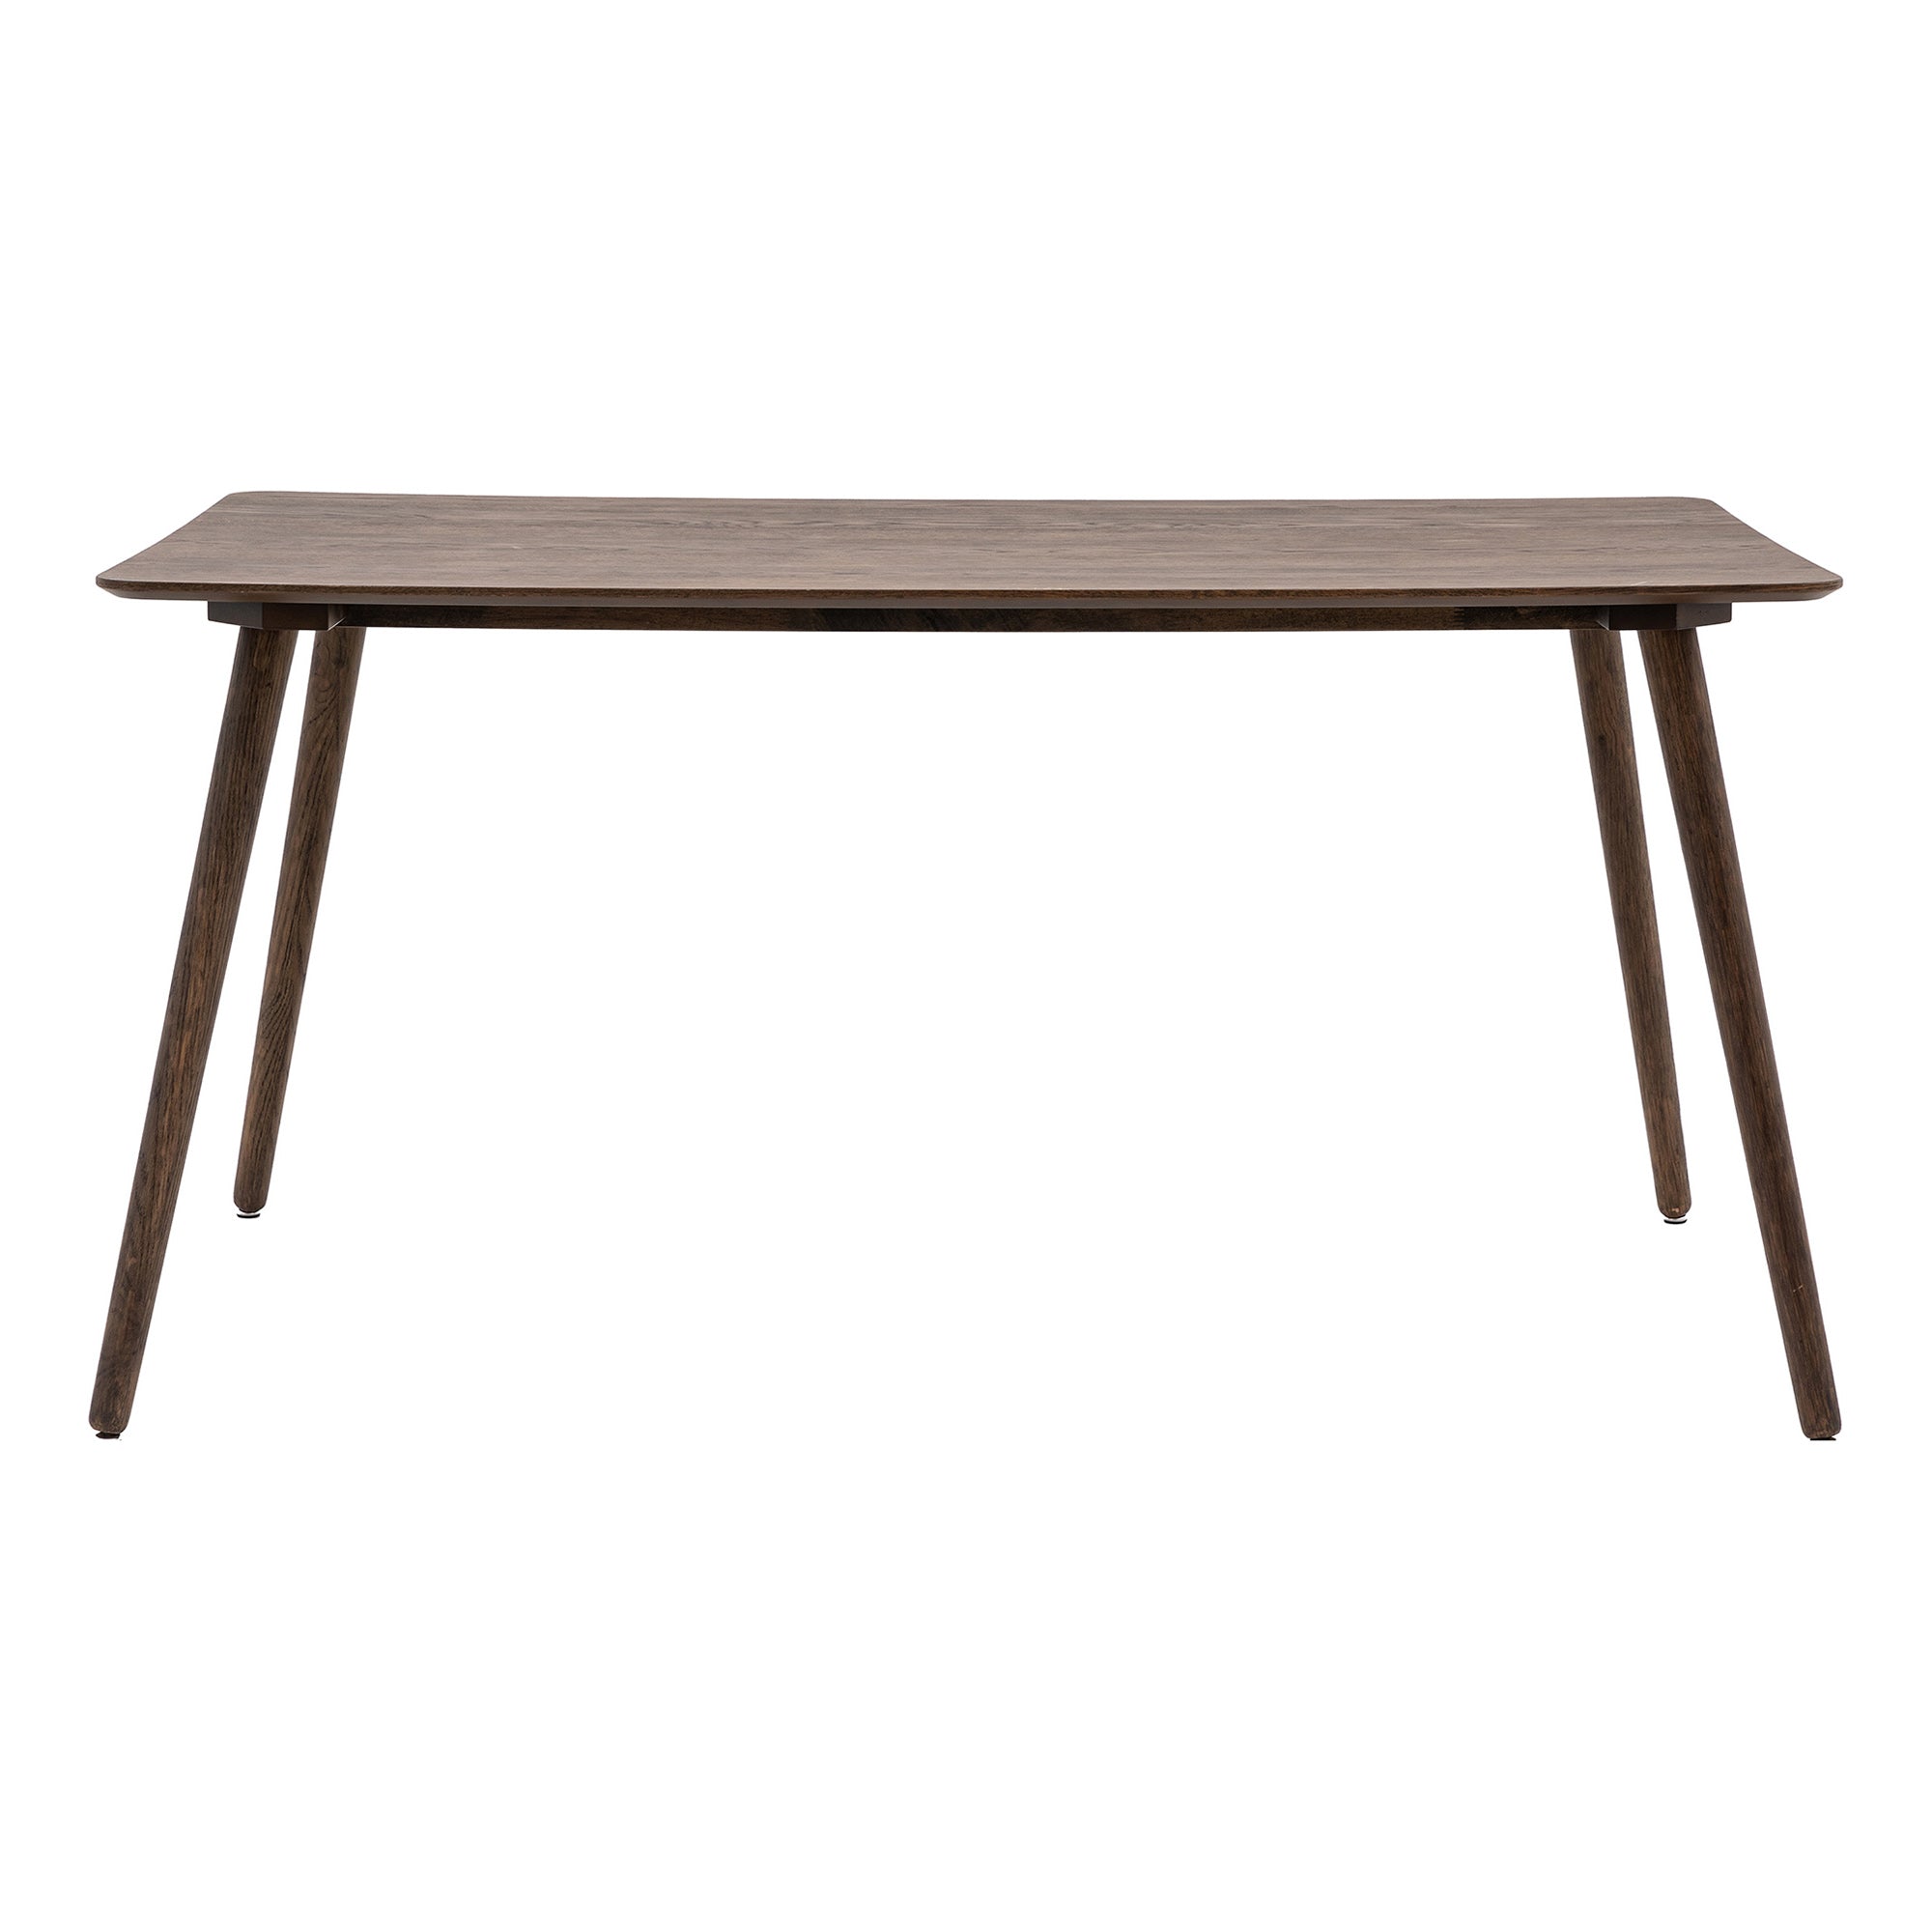 Hattie Rectangle Dining Table